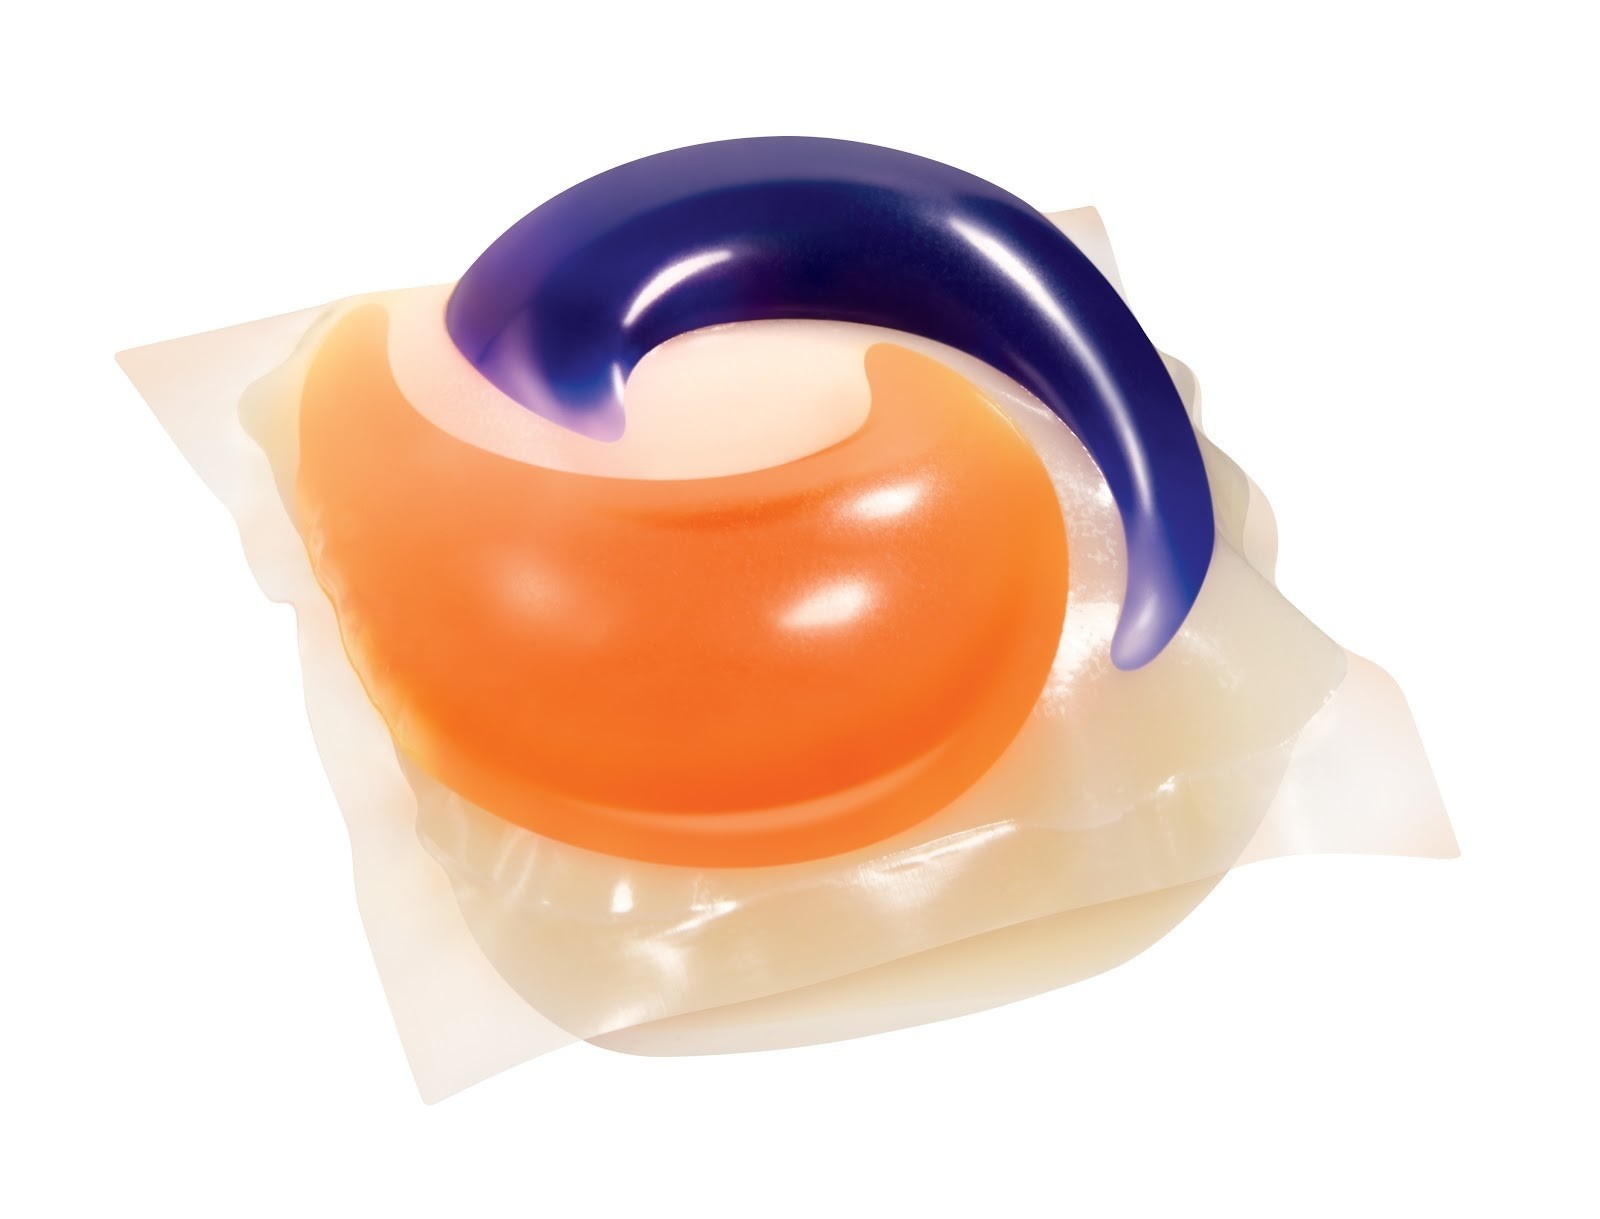 Teens are daring each other to eat Tide pods. We don't need to tell you